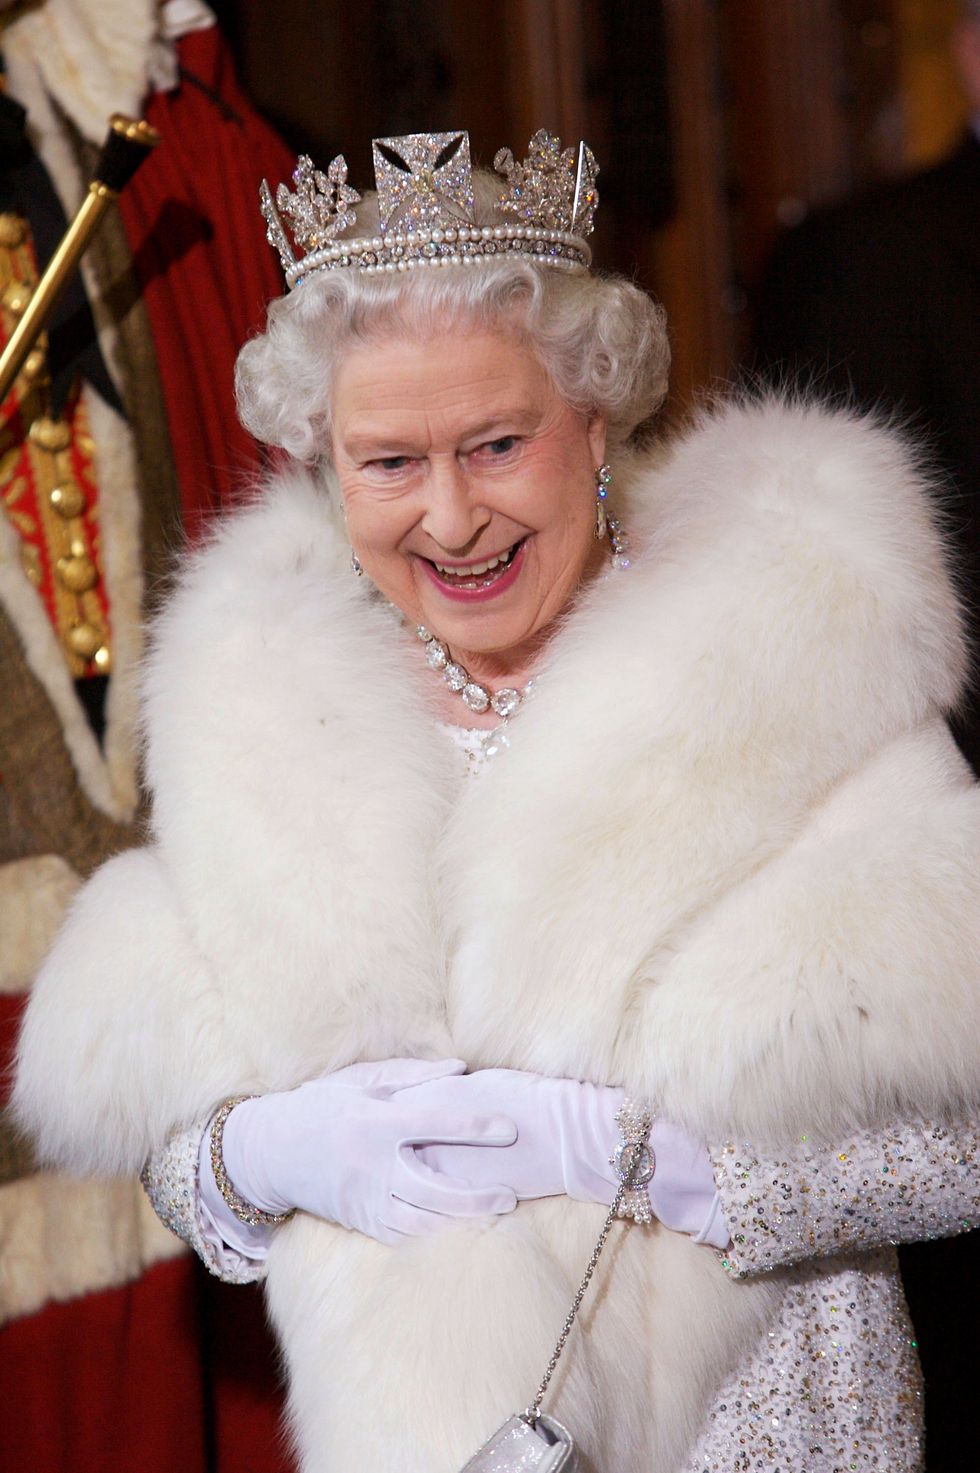 london   november 15 no publication in uk media for 28 days queen elizabeth ii at the house of lords for the state opening of parliament on november 15, 2006 in london, england photo by pooltim graham picture librarygetty images